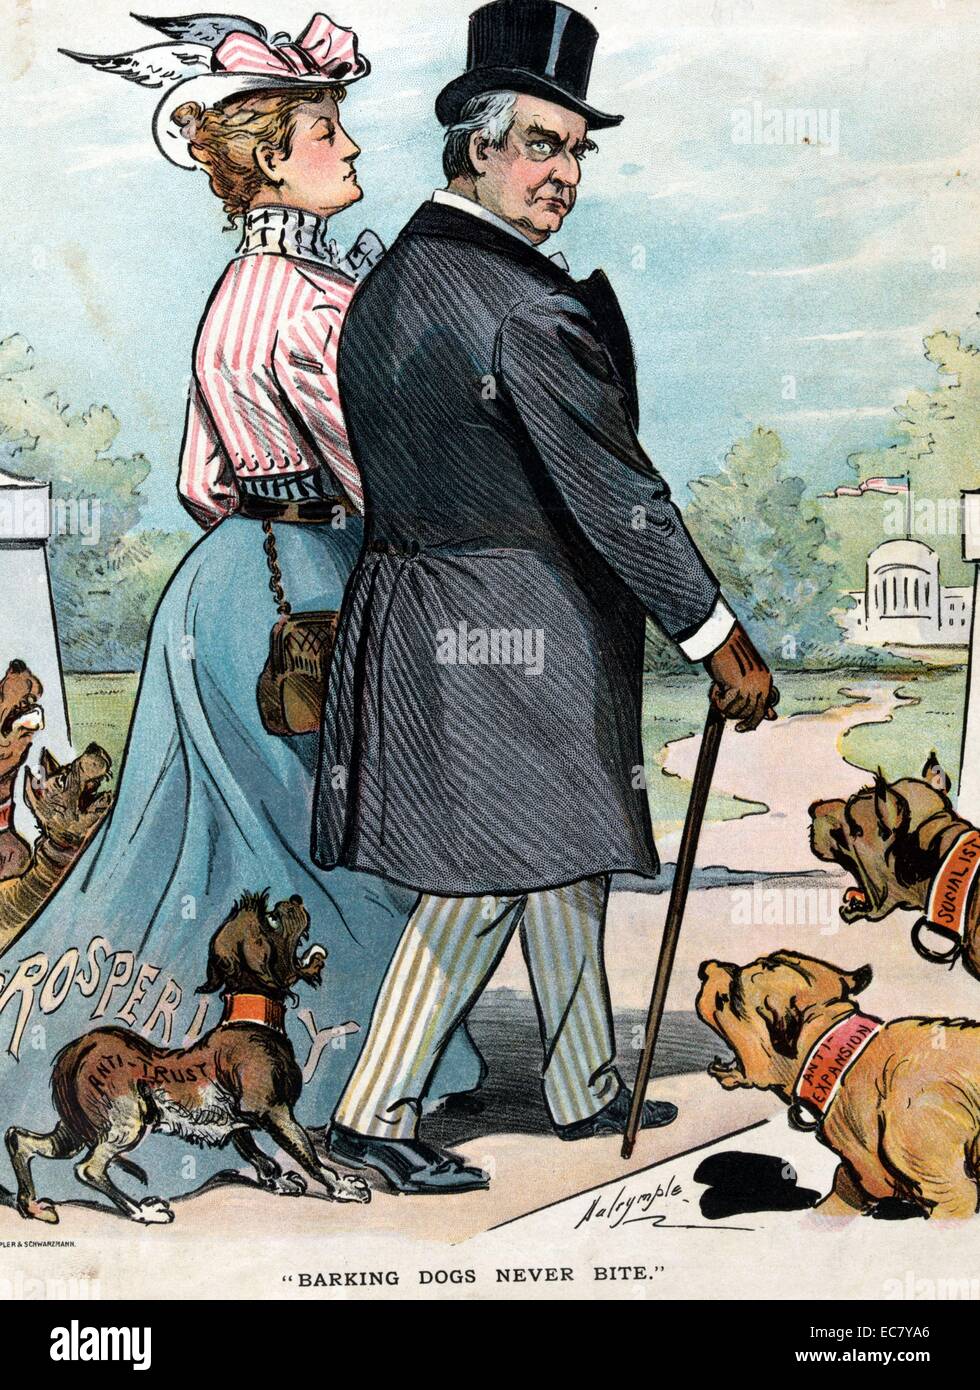 'Barking dogs never bite'' President McKinley walking onto the White House grounds with a woman labelled 'Prosperity', passing a group of barking dogs labelled 'Anti-prosperity,' 'Silverites,' 'Anti-trust,' 'Anti-expansion,' and 'Socialist.' The woman, dressed in a red, white, and blue outfit, may represent Columbia or possibly Mrs. McKinley; she is wearing a winged hat like that of the Roman god Mercury, though may also represent Minerva, the Roman goddess and patroness of commerce and trade. Stock Photo